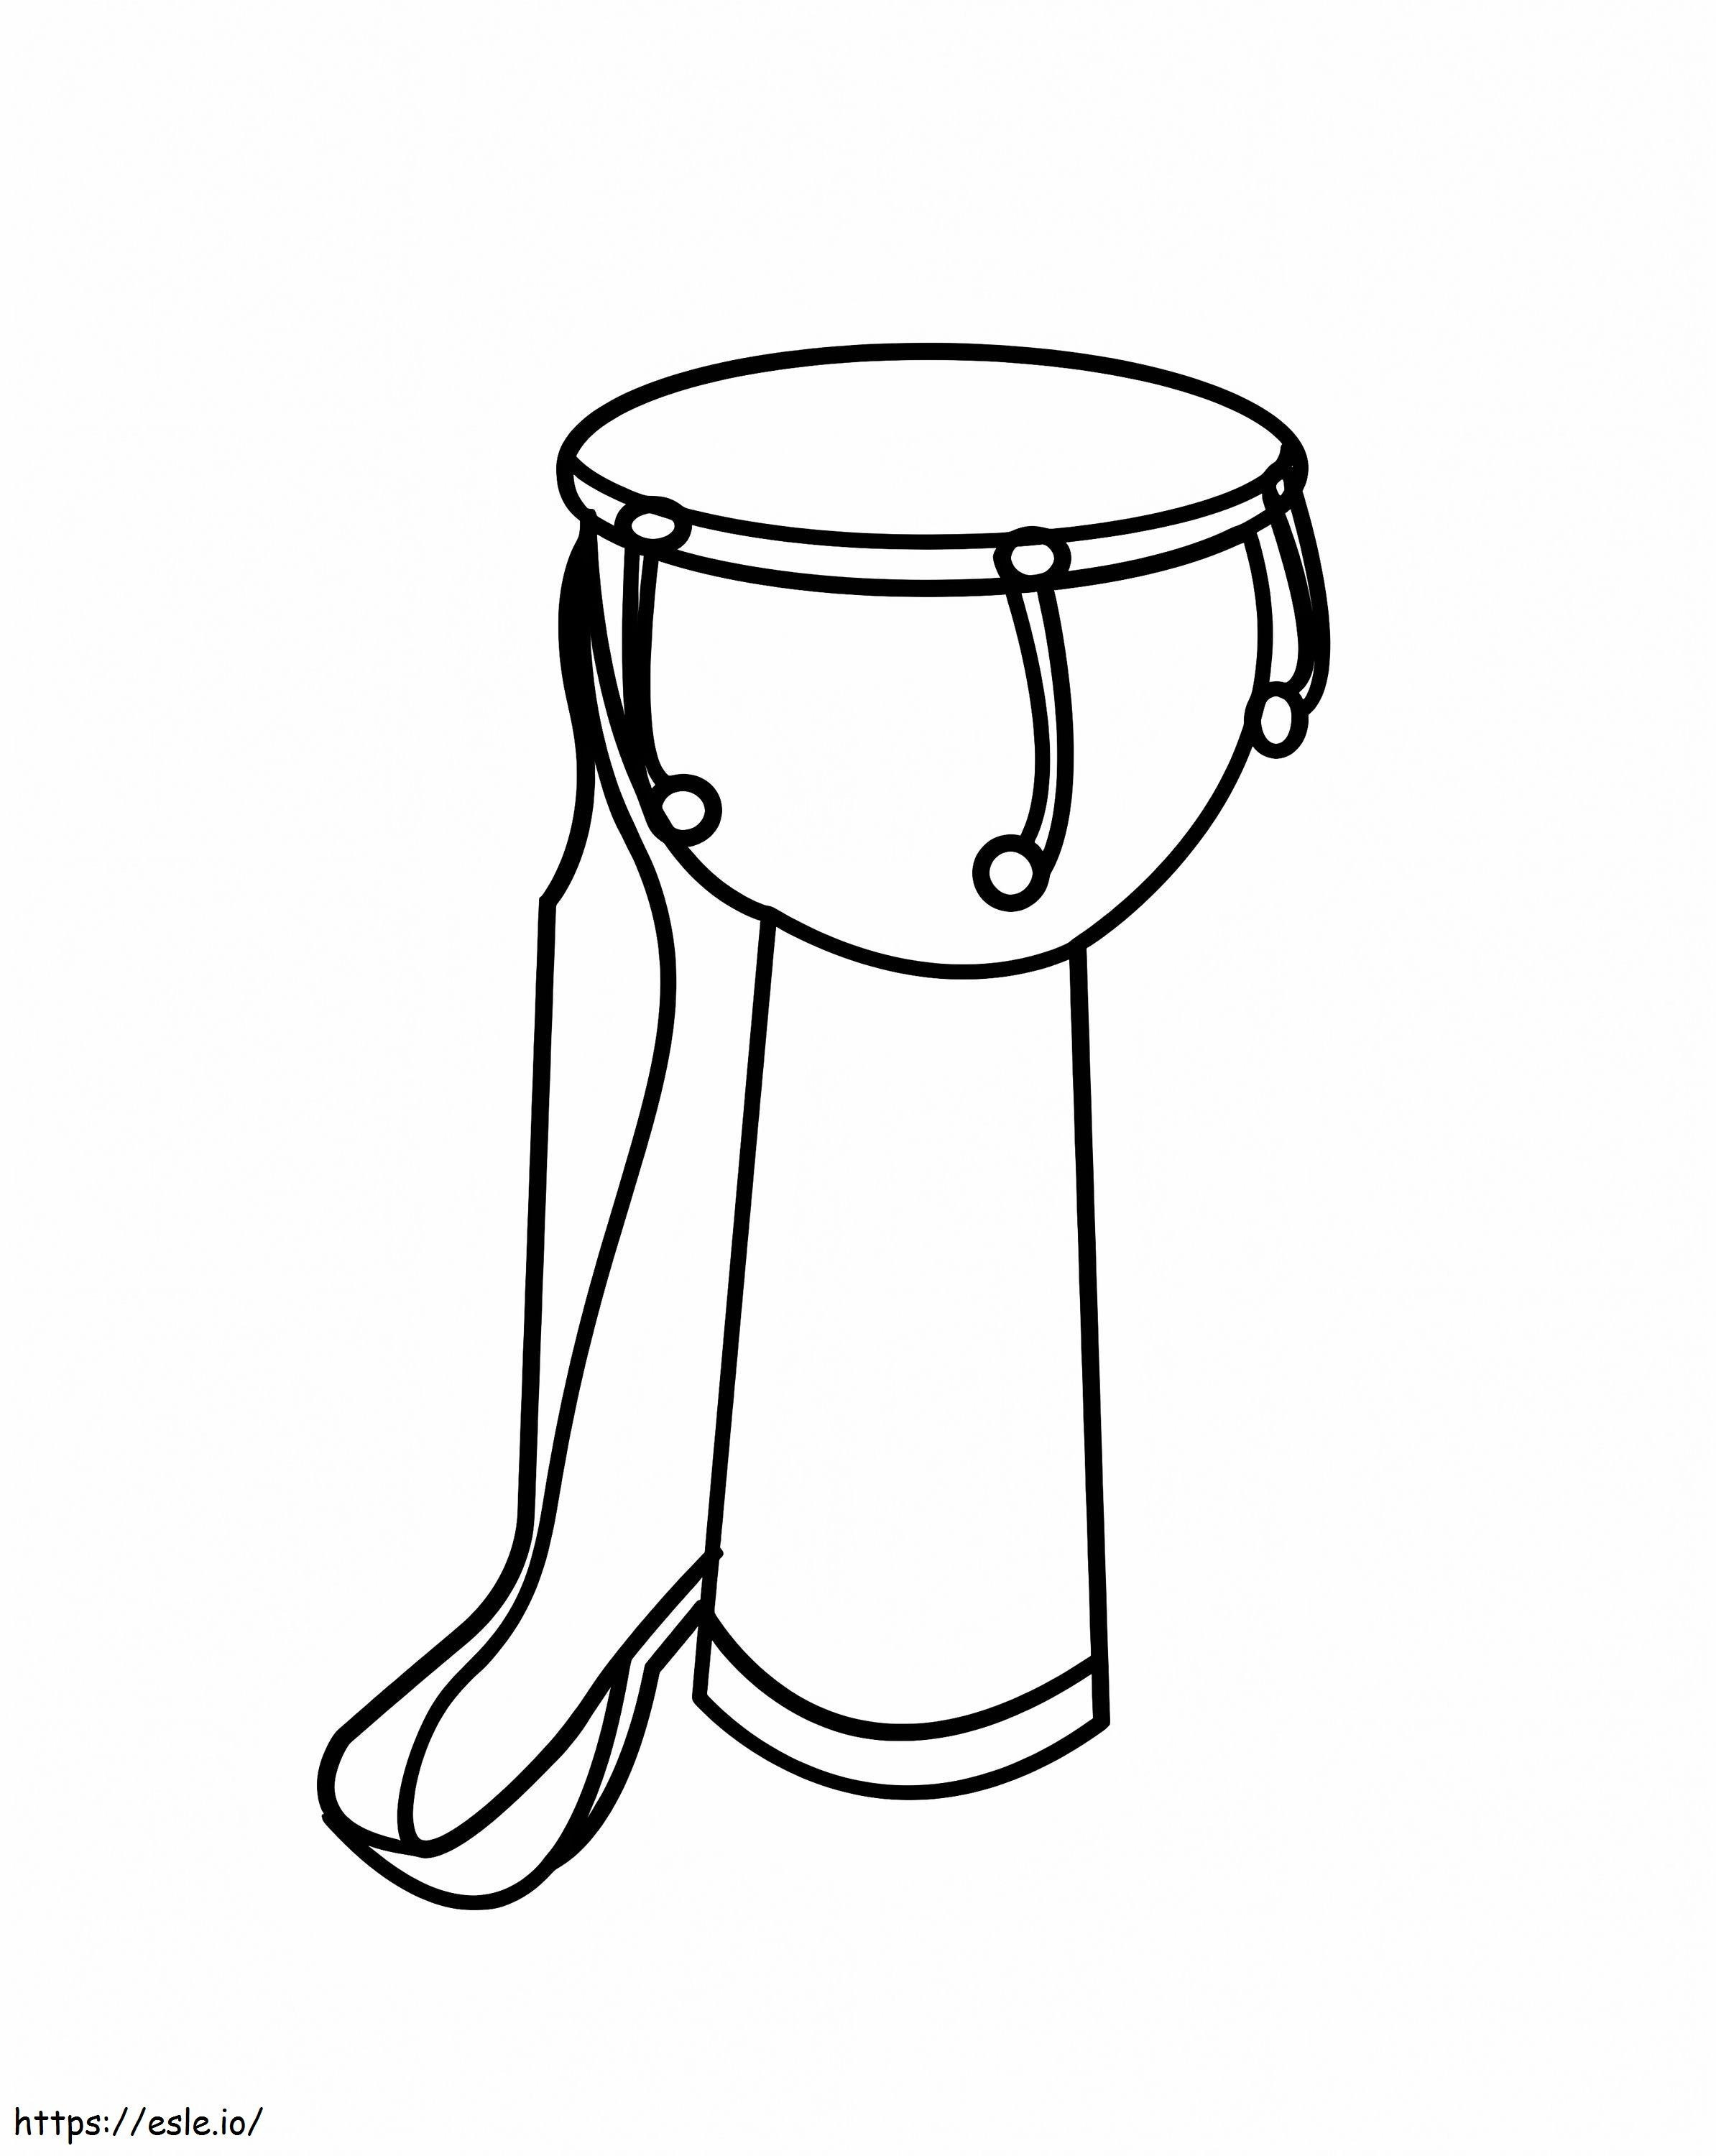 African Drum Drums coloring page